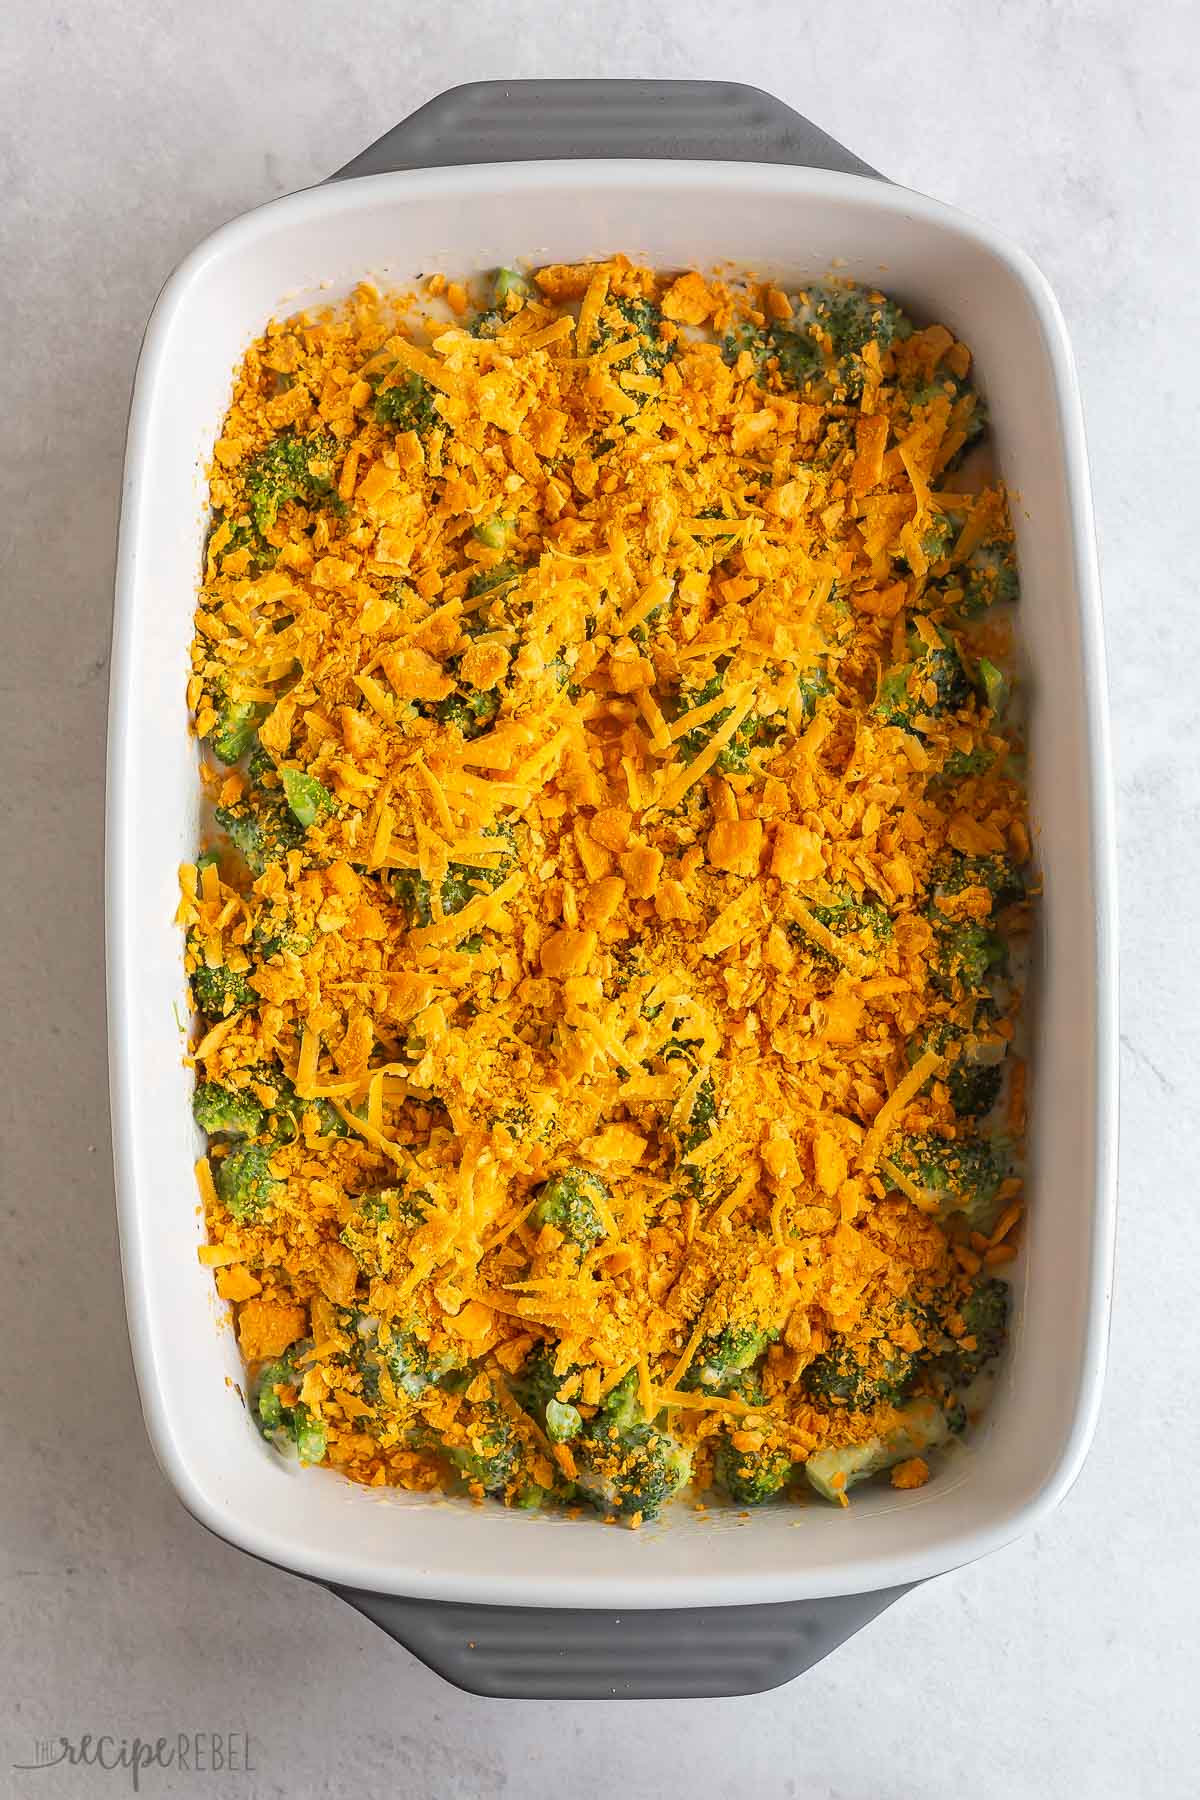 broccoli in casserole dish with sauce shredded cheddar cheese and crushed crackers.